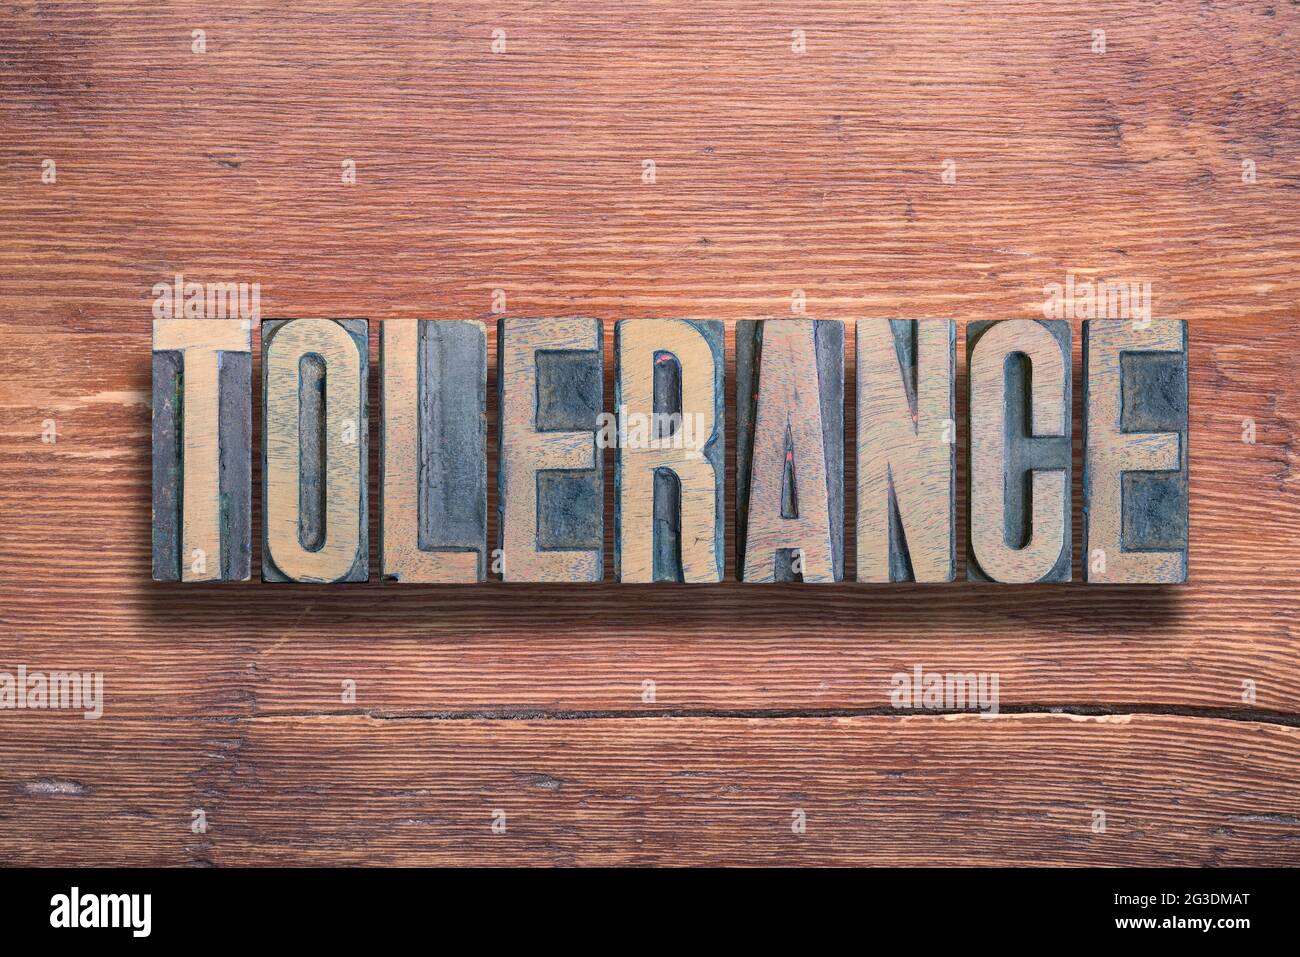 tolerance word combined on vintage varnished wooden surface Stock Photo